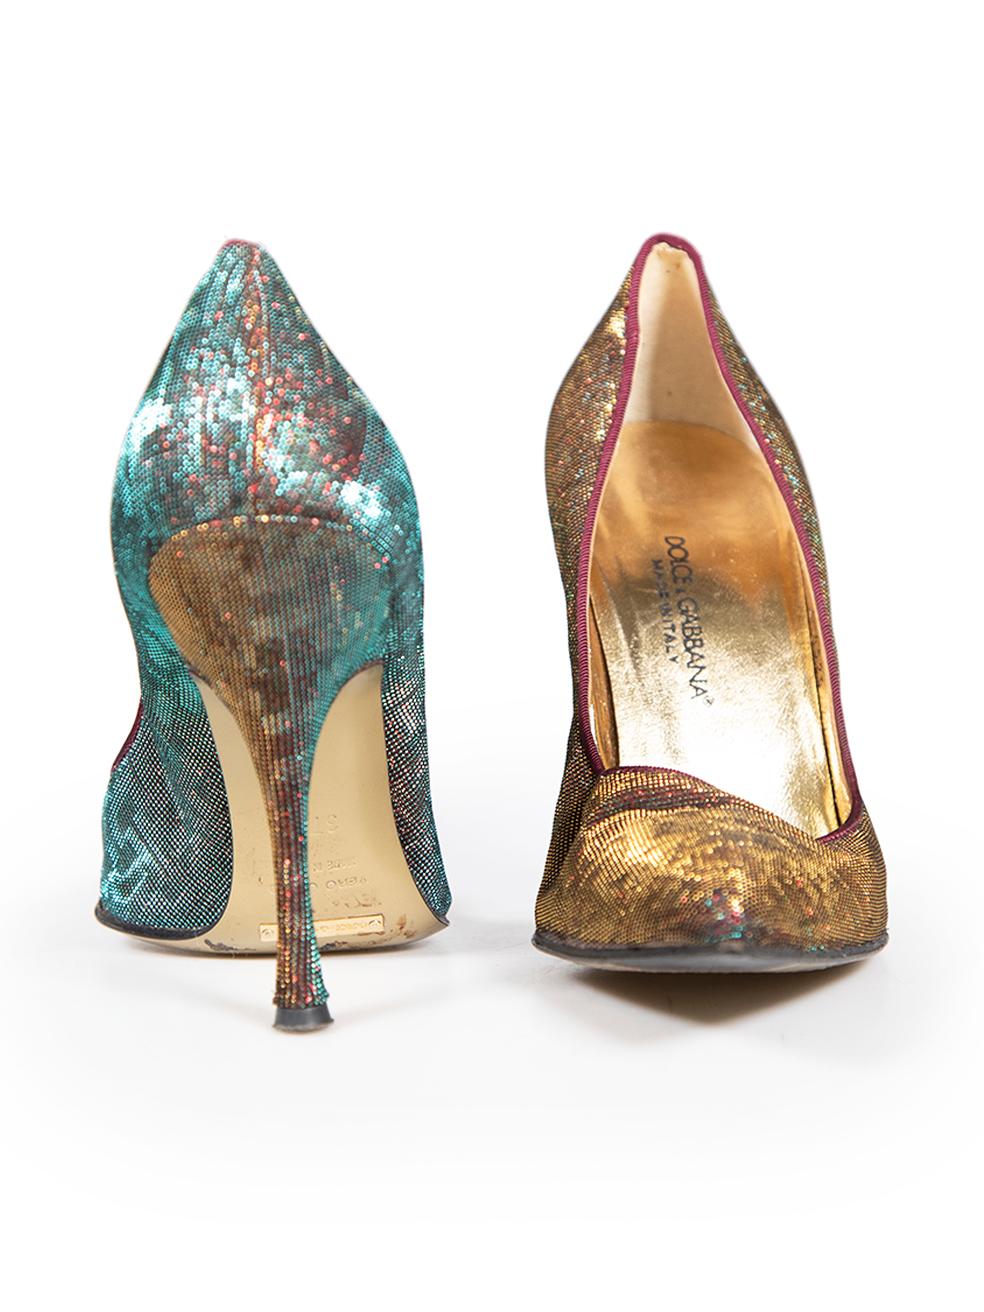 Dolce & Gabbana Vintage Metallic Pumps Size IT 37.5 In Good Condition For Sale In London, GB